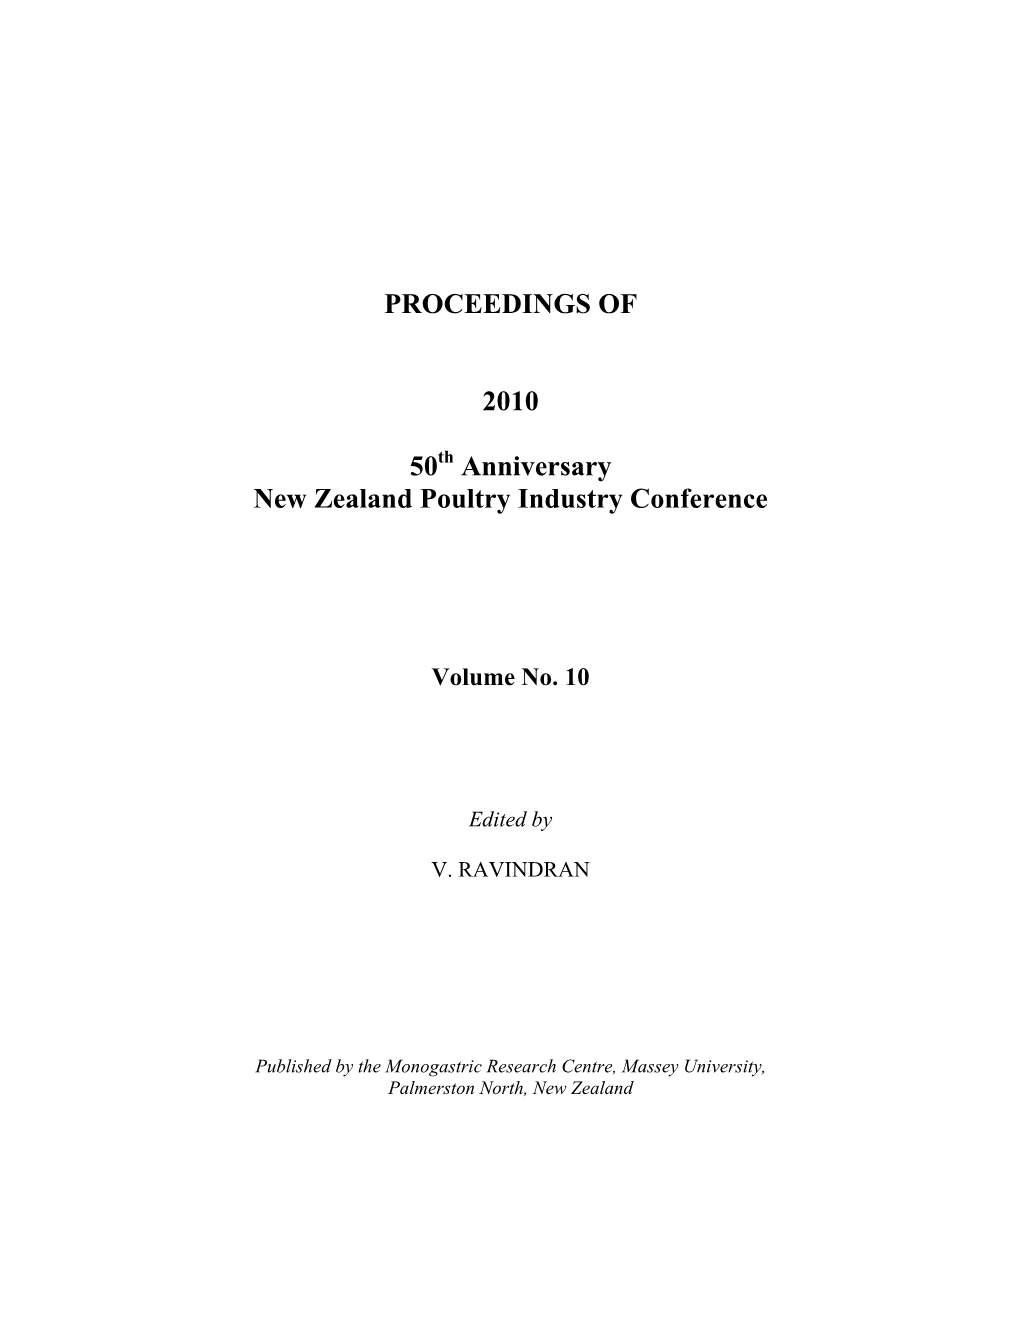 PROCEEDINGS of 2010 50 Anniversary New Zealand Poultry Industry Conference